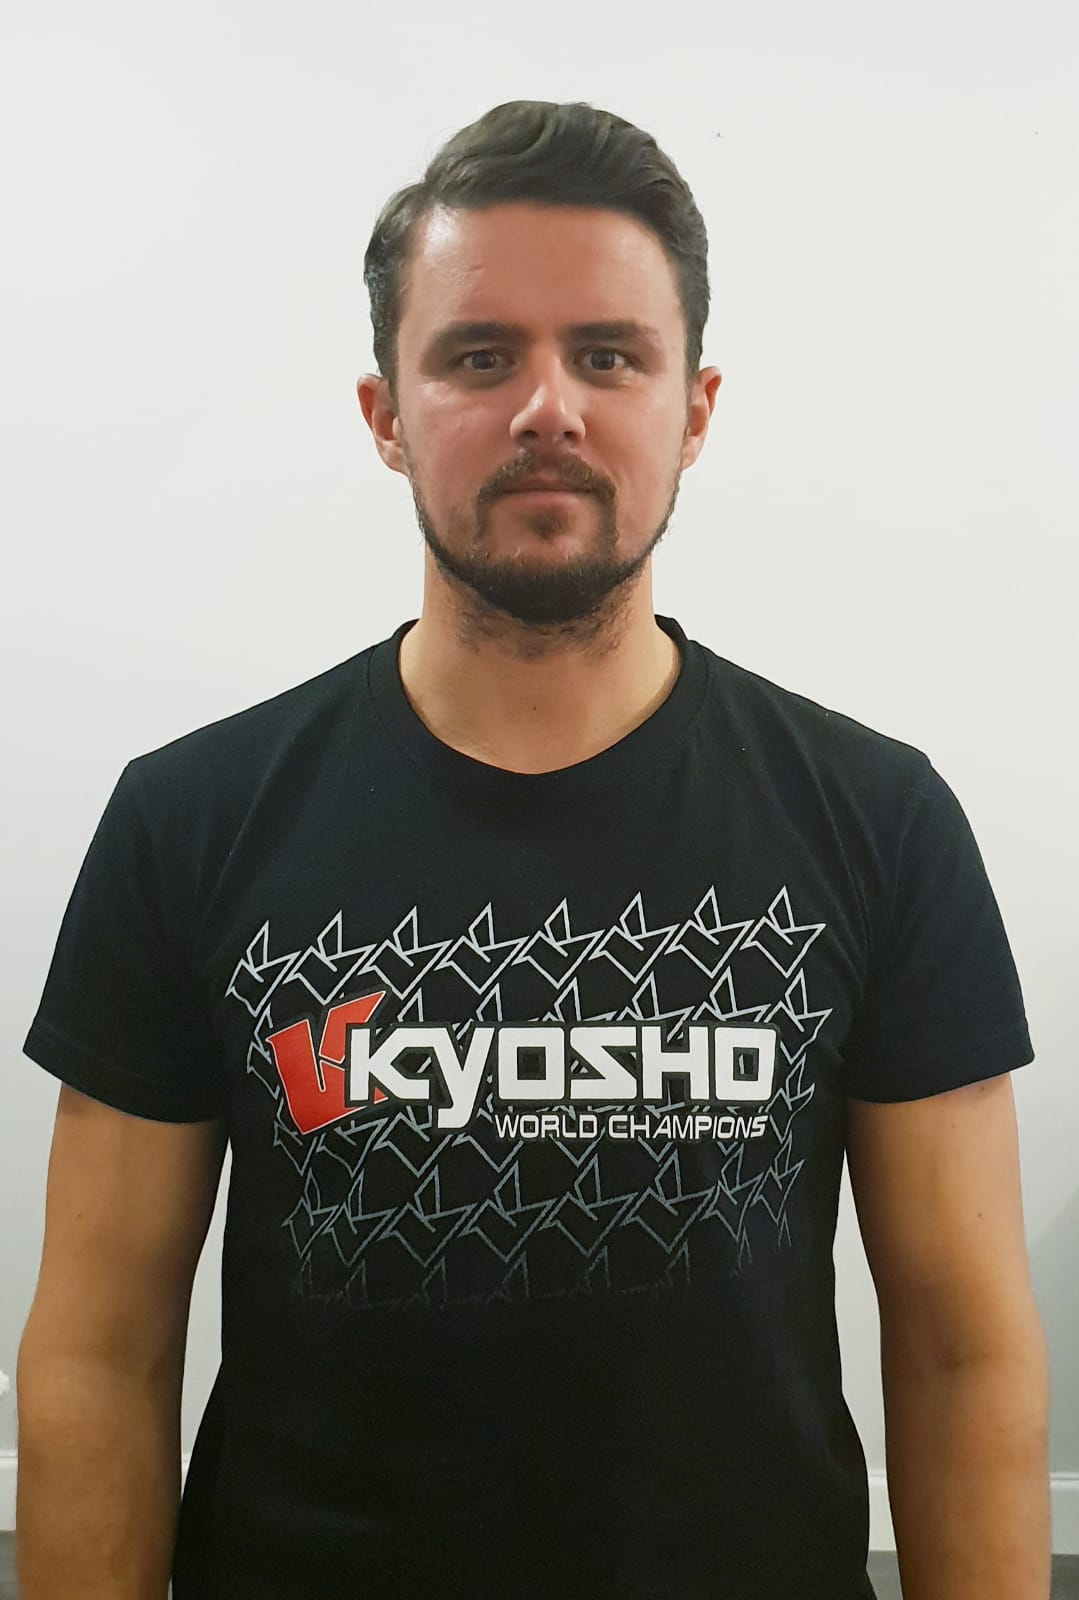 Kyosho Europe would like to welcome David Snee to the UK Team